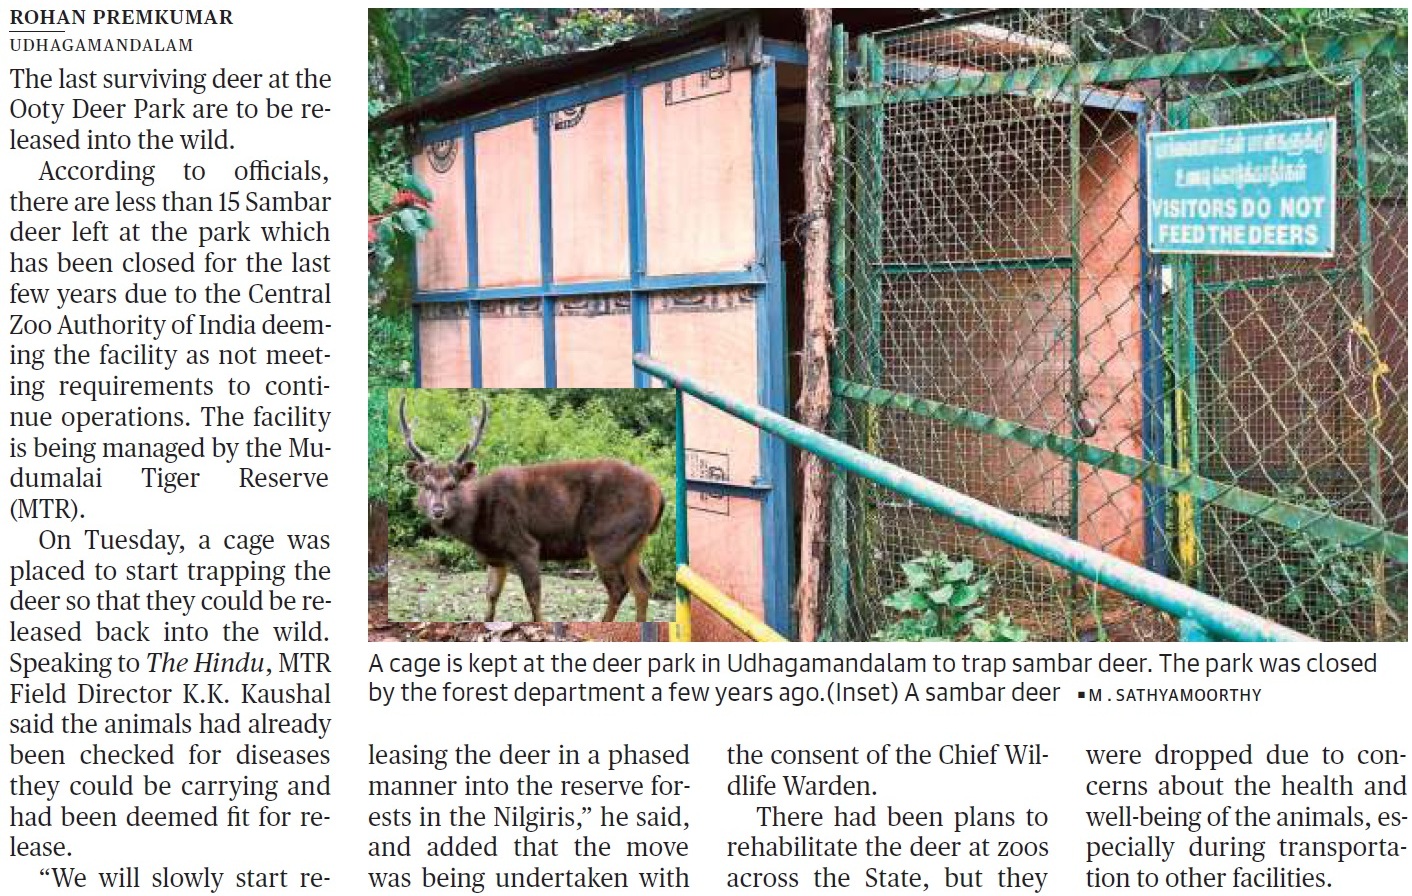 Sambar deer at Ooty park to be let into the wild